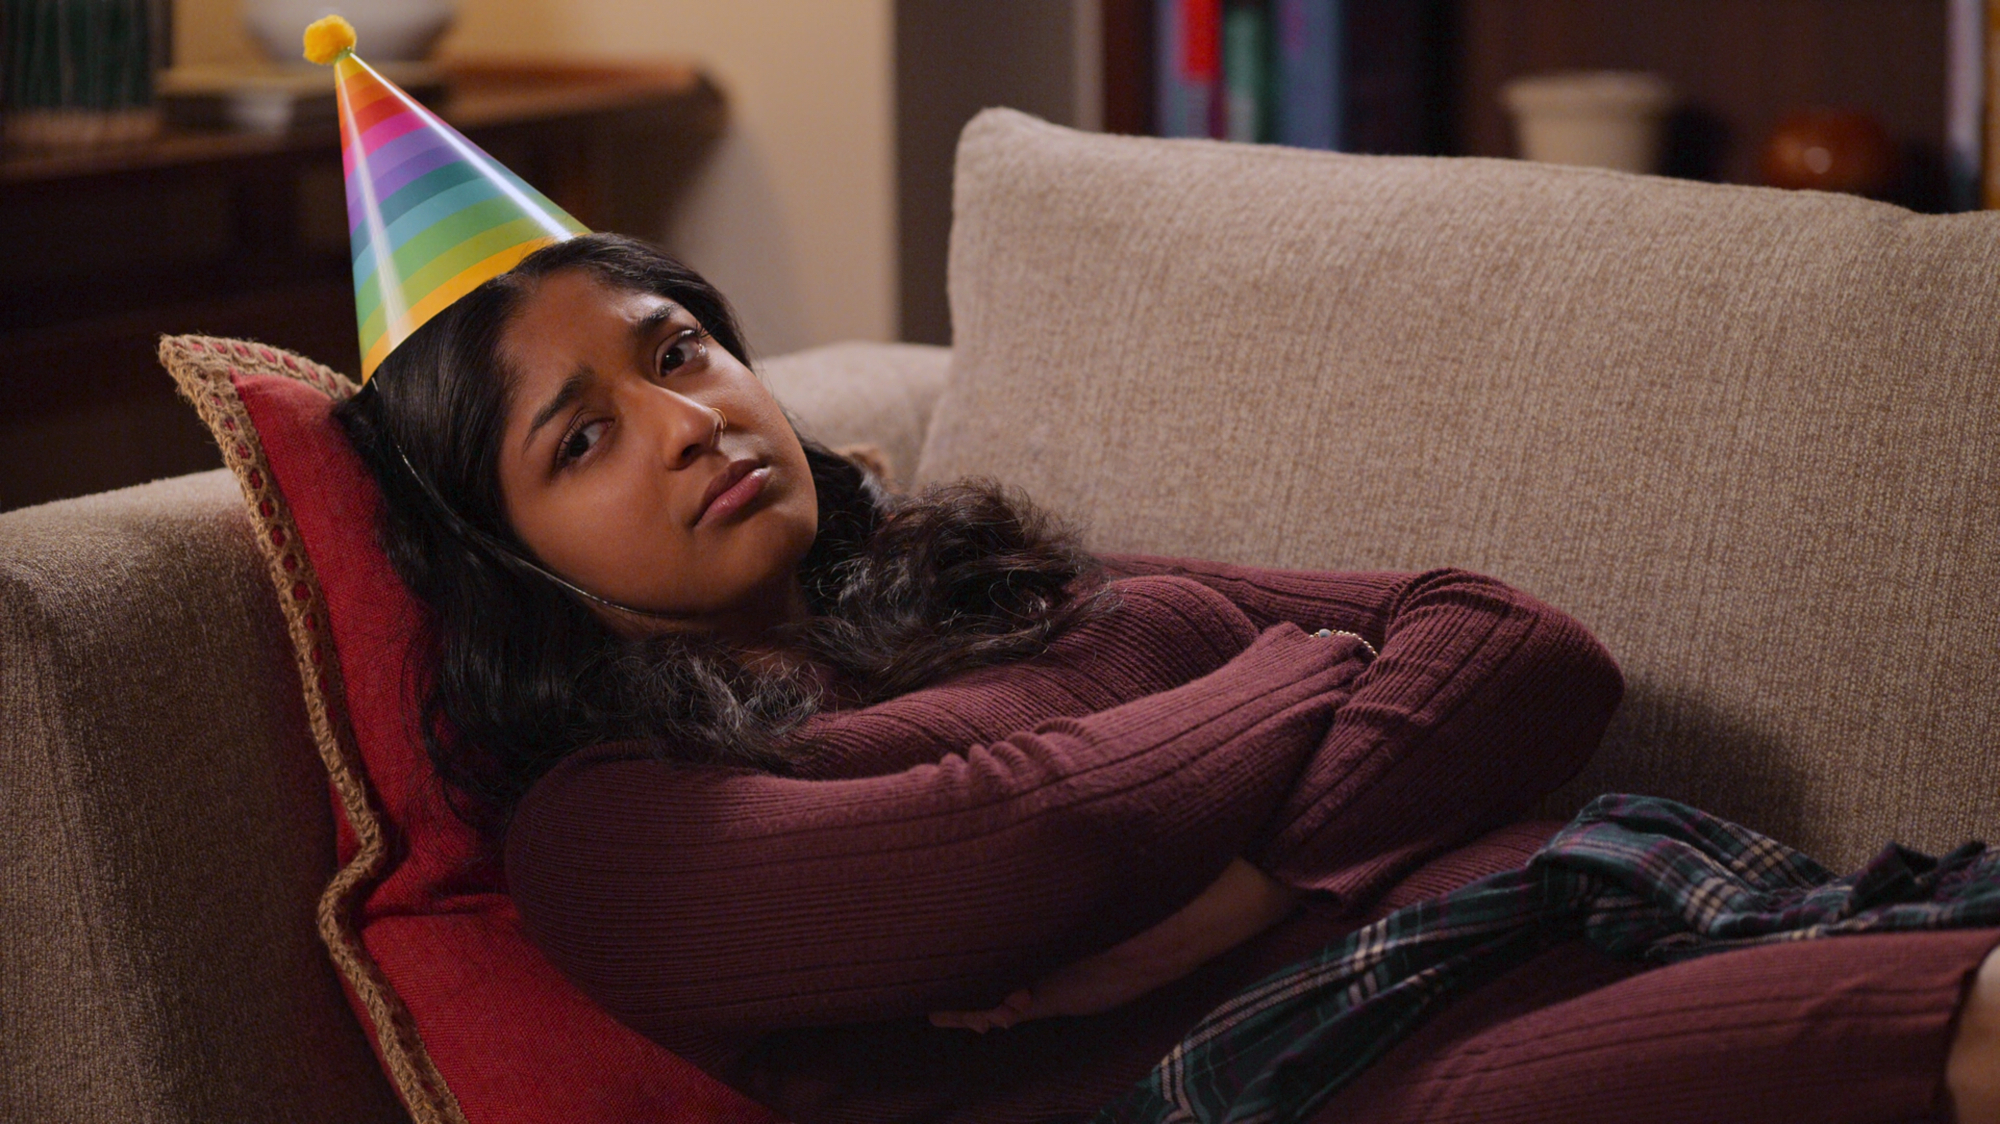 Maitreyi Ramakrishnan as Devi in 'Never Have I Ever,' a show that is on our list of series ending next season. She's lying on a couch with a birthday hat on and pouting.